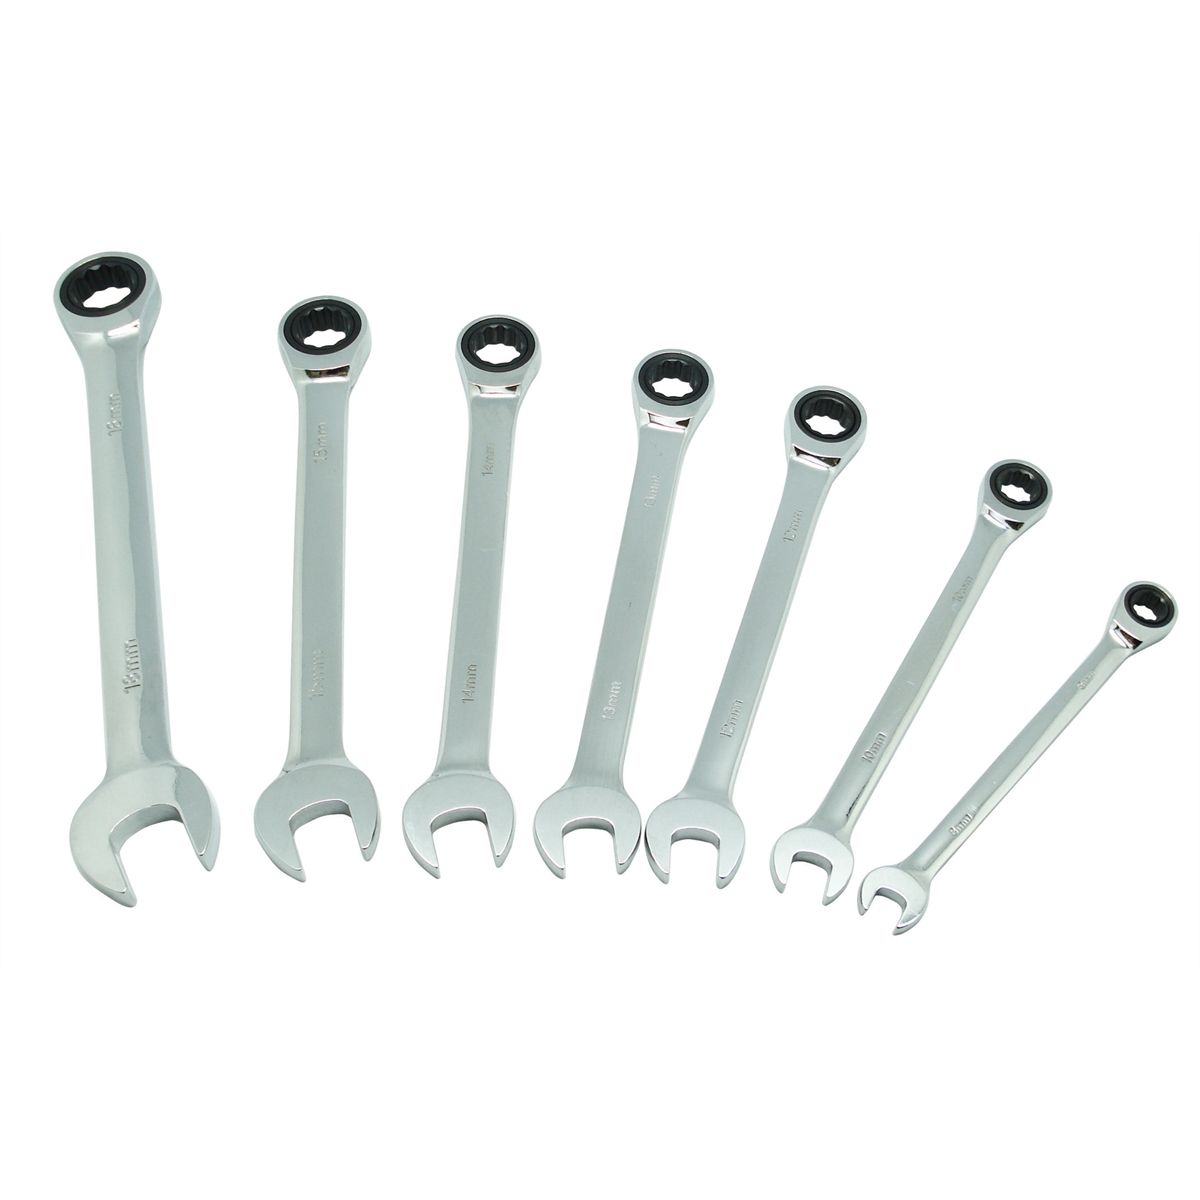 7 Piece Metric Ratcheting Wrench Set